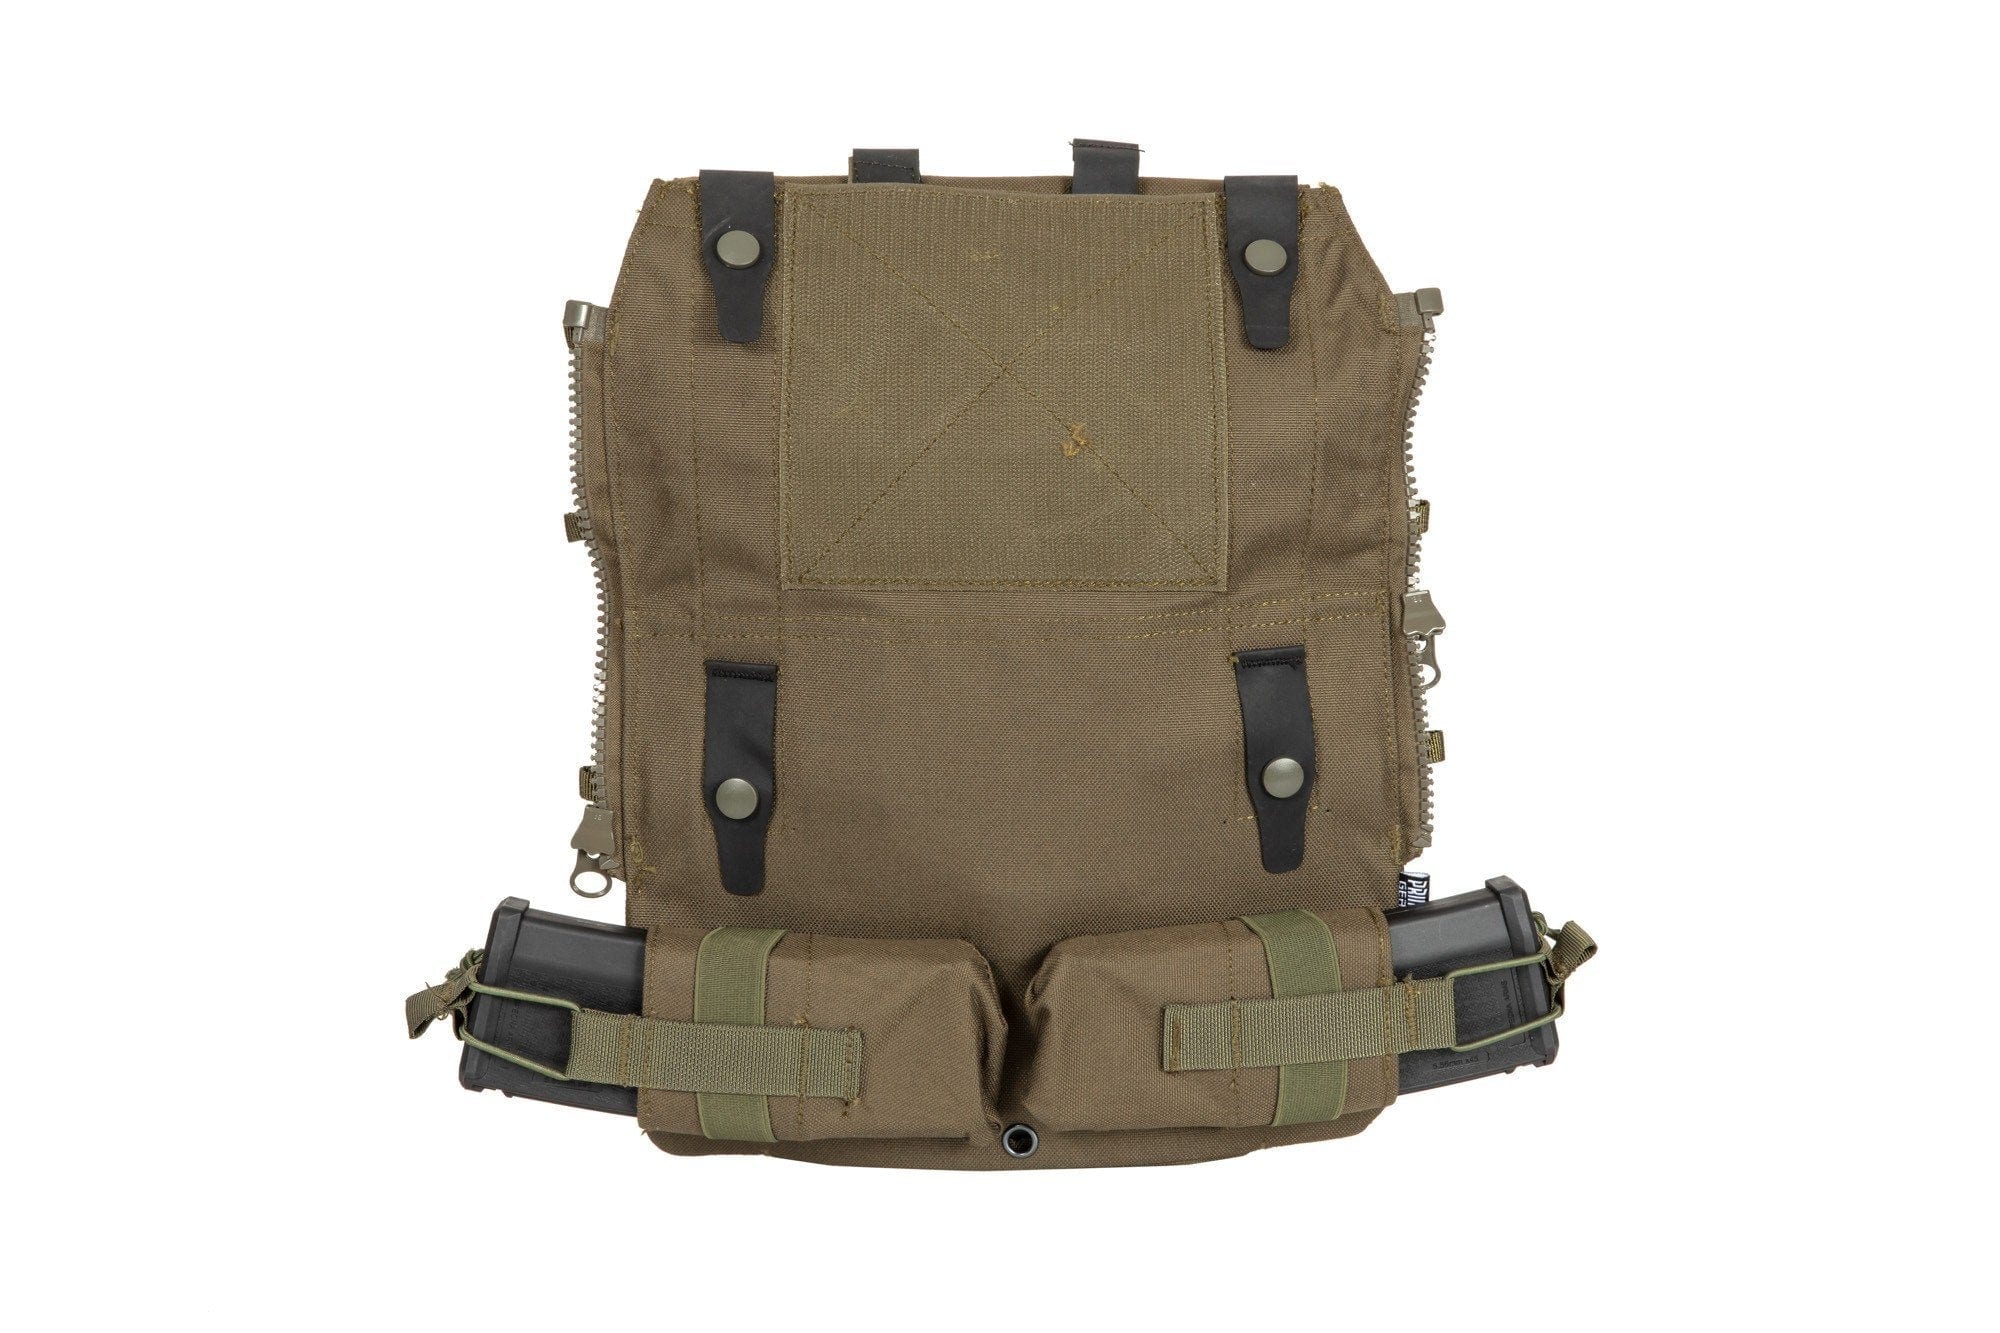 Tactical Backpack for Rush 2.0 Tactical Vest – Olive Drab